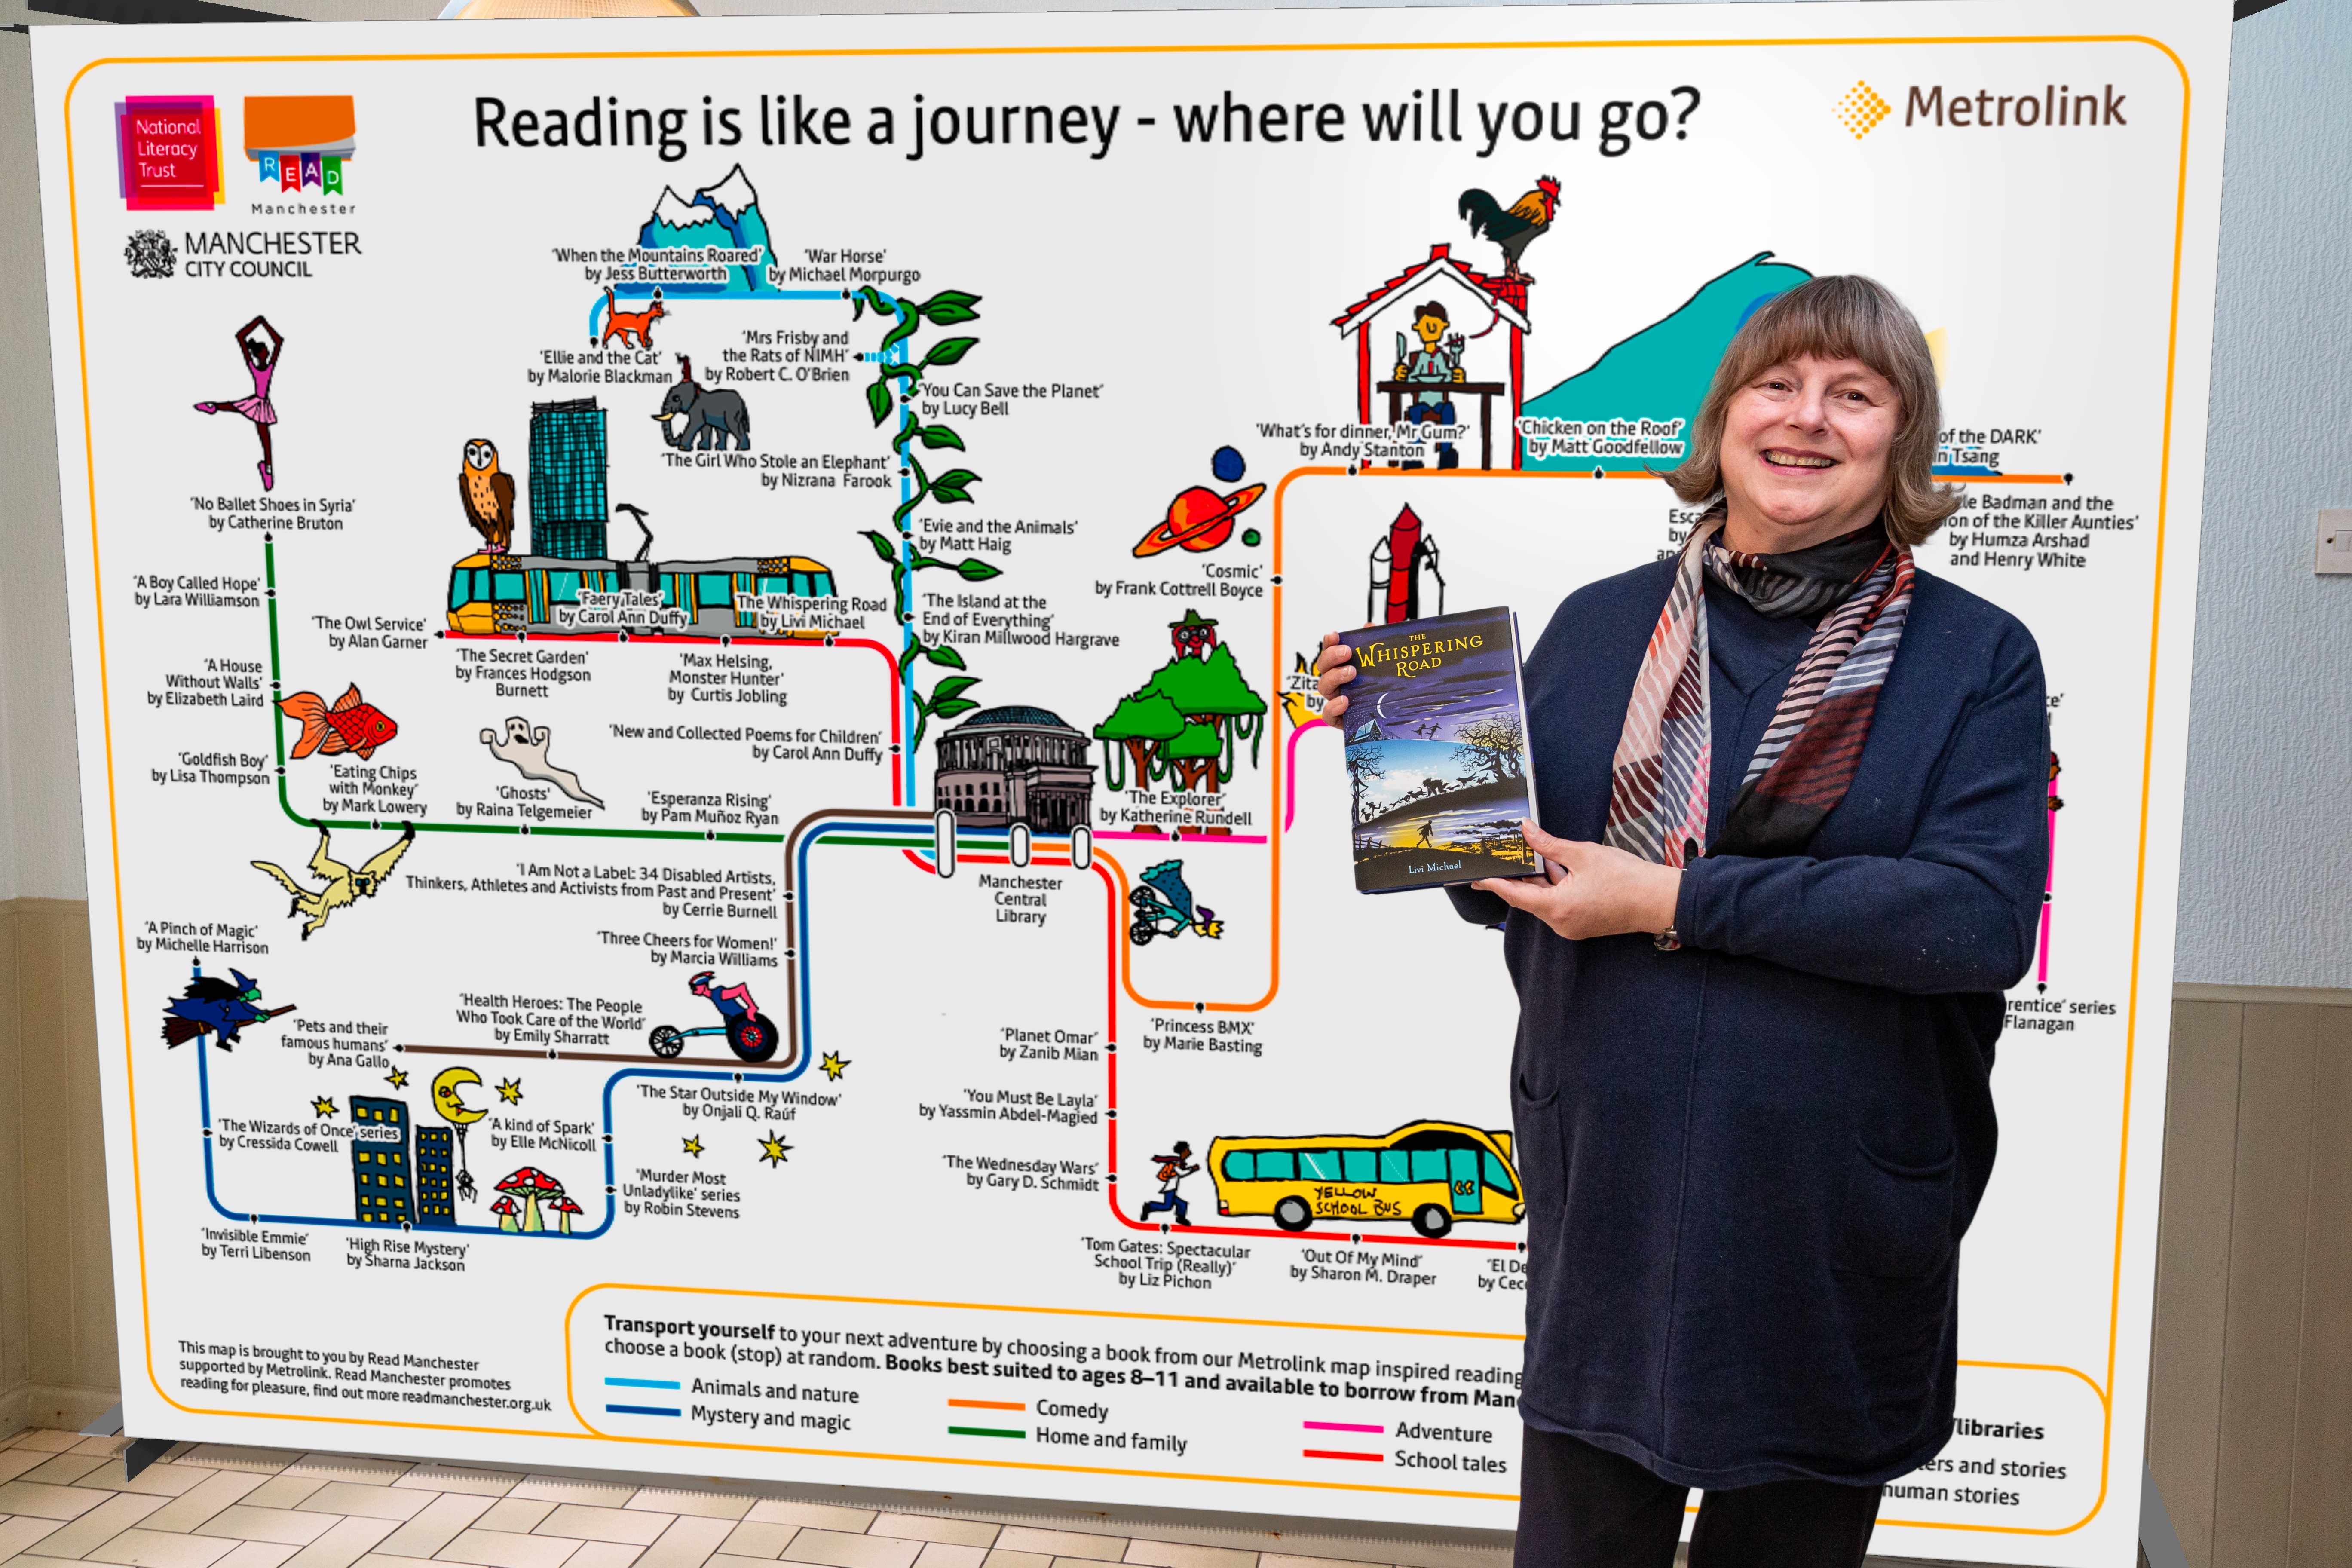 Livi Michael's book The Whispering Road is on the reading map